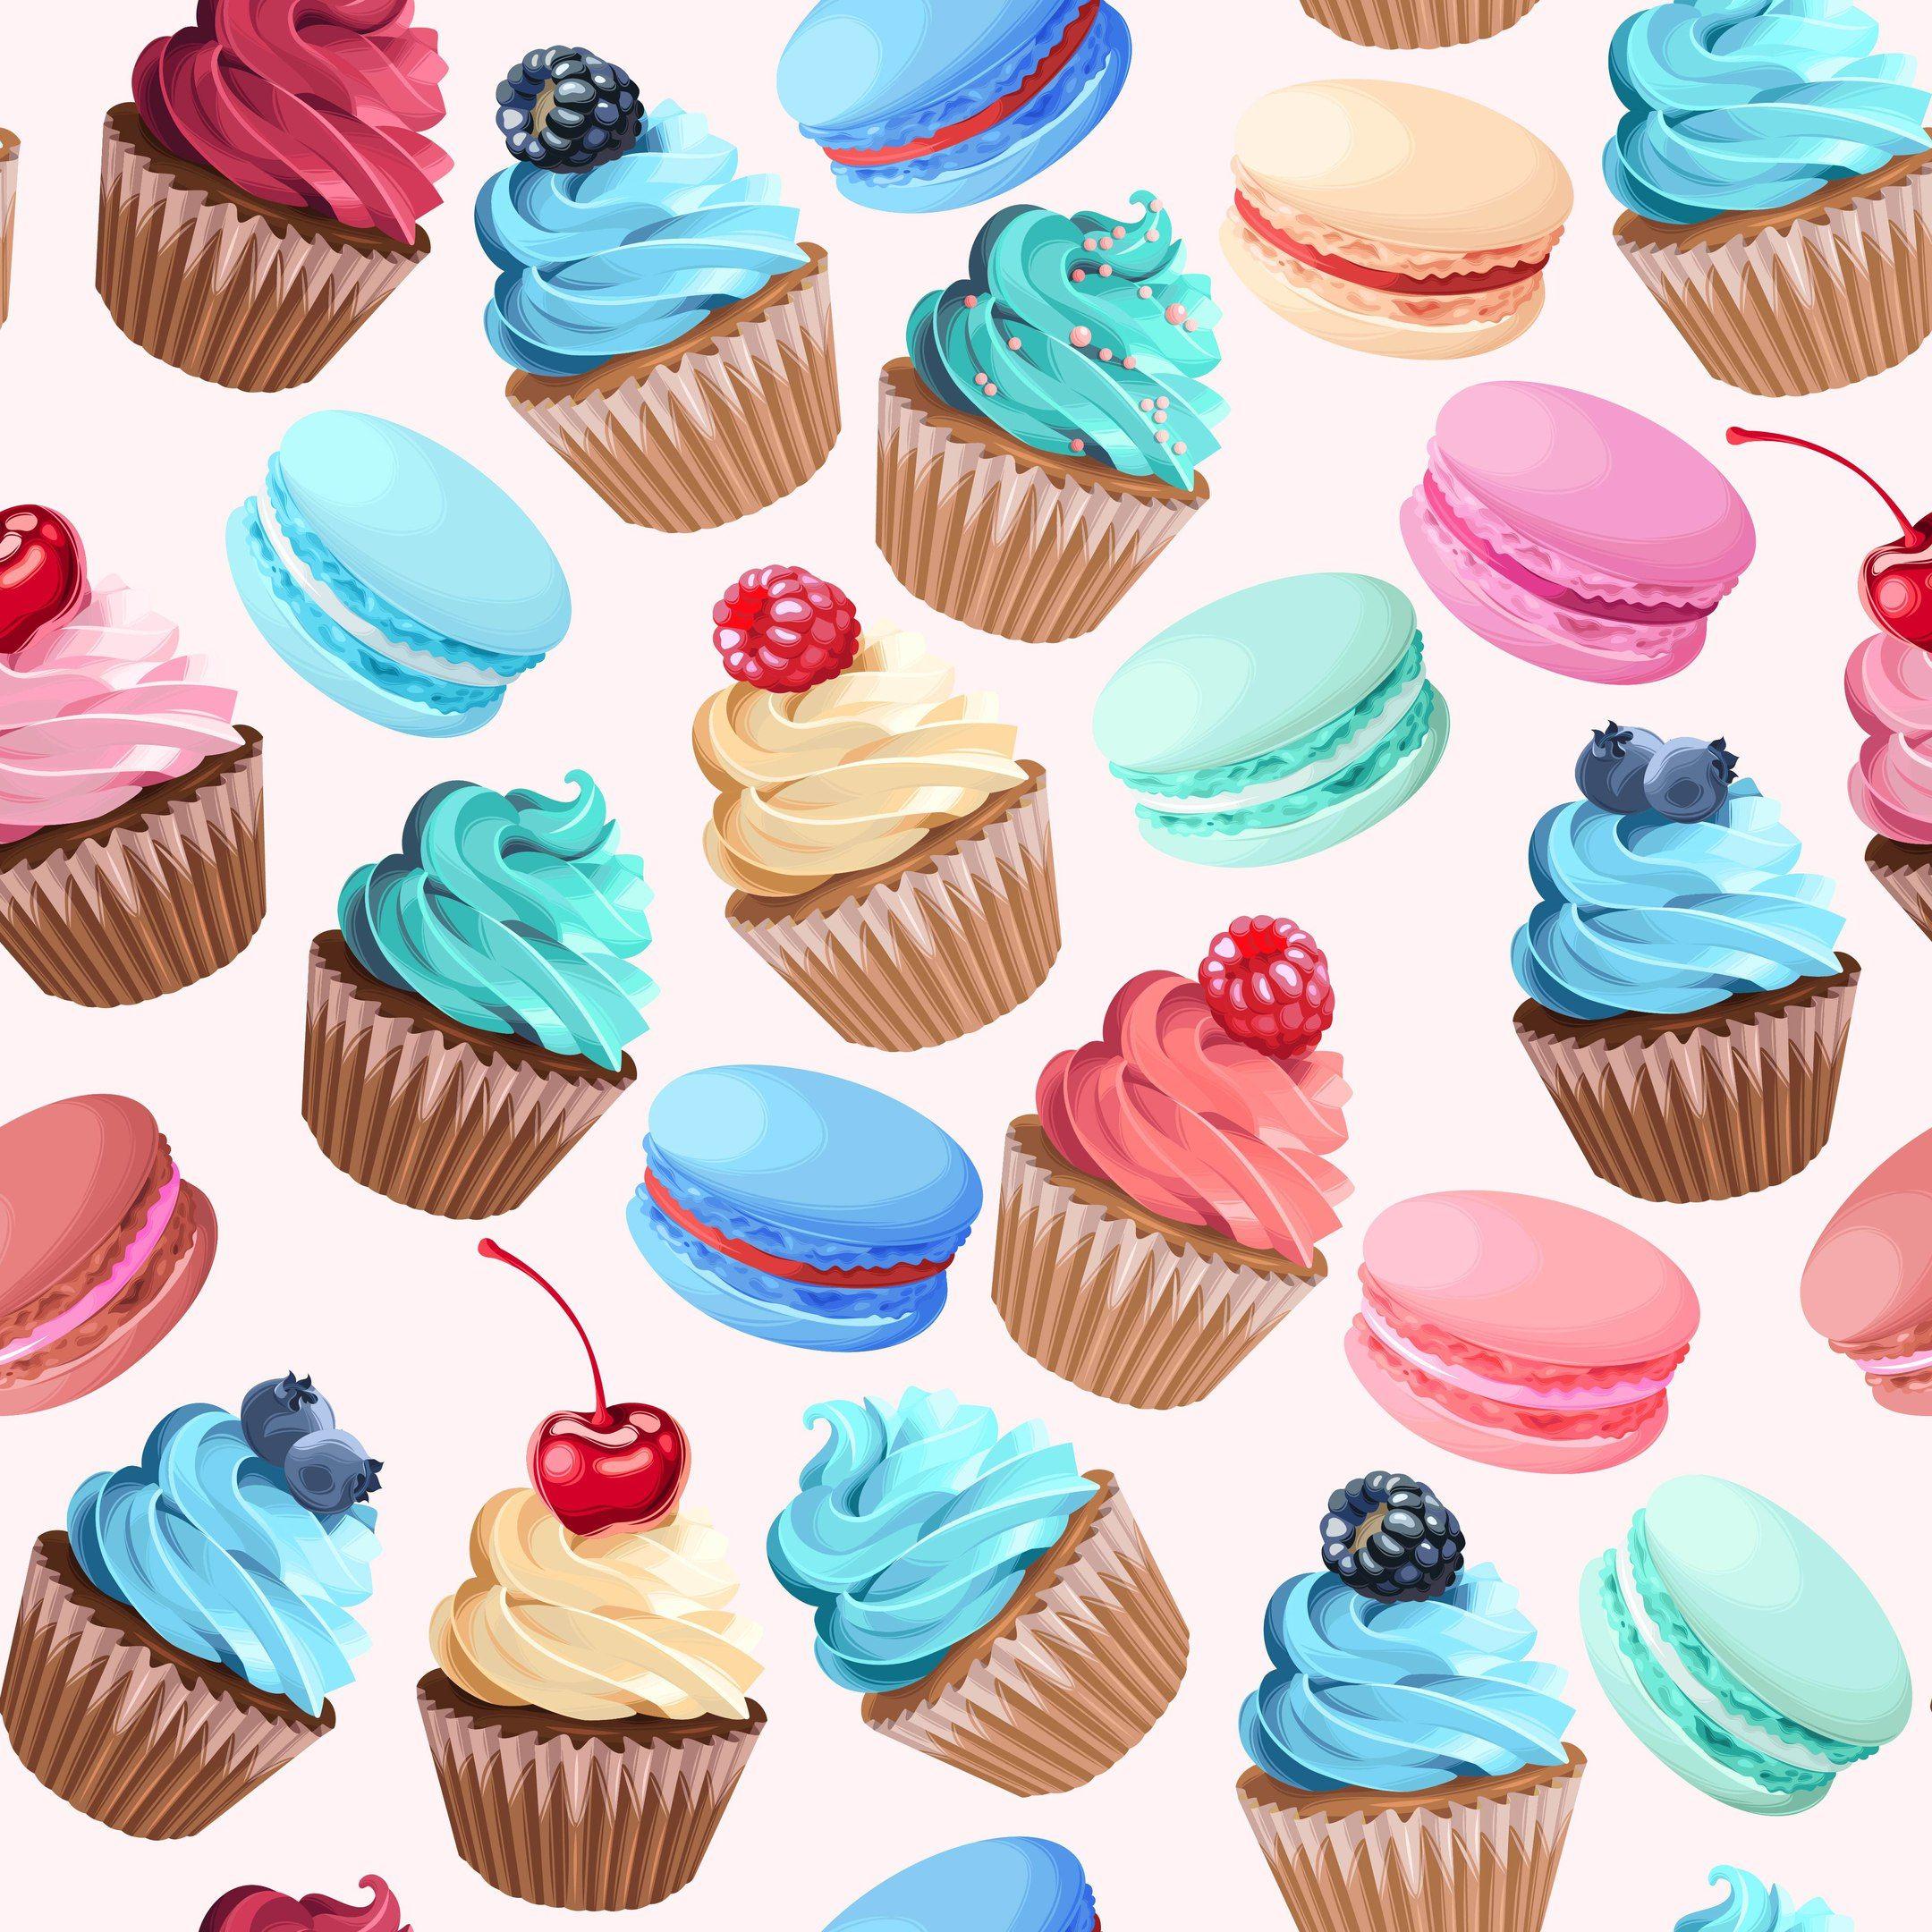 Realistic Cupcake Cute Wallpapers - Top Free Realistic ...
